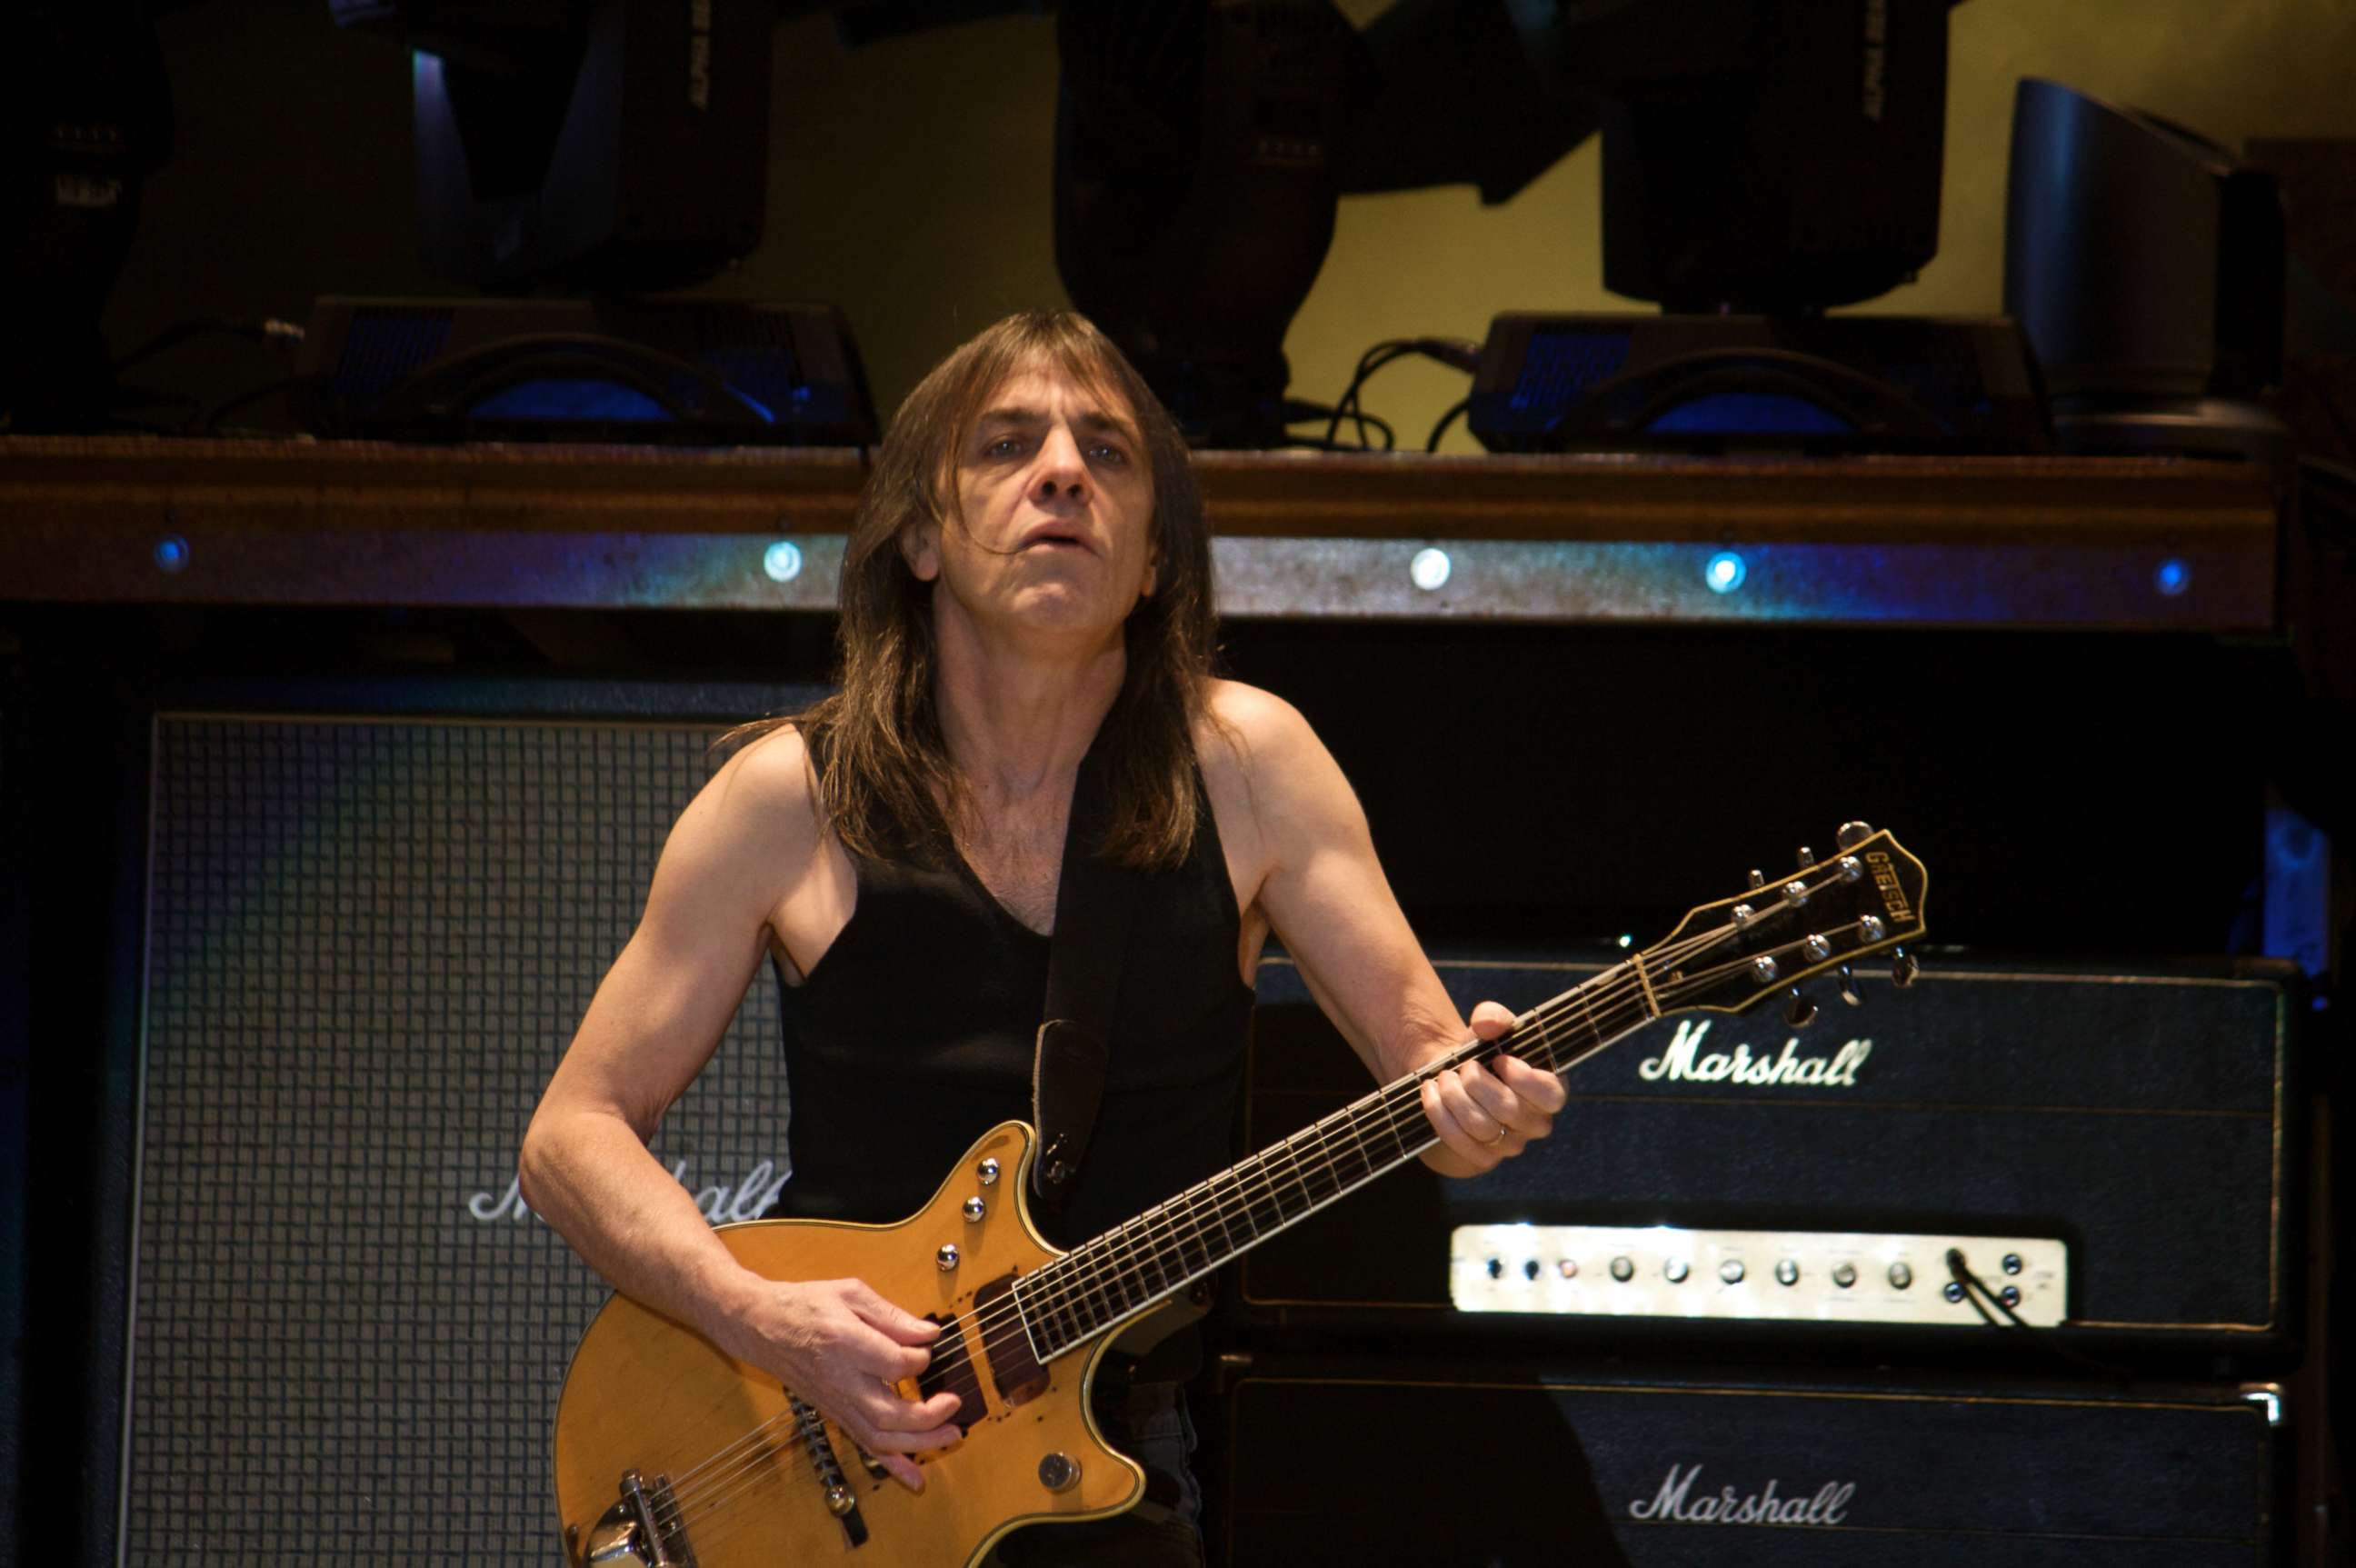 PHOTO: Guitarist Malcolm Young of the rock band AC/DC performs at the Rogers Center in Toronto, Jan. 9, 2009.